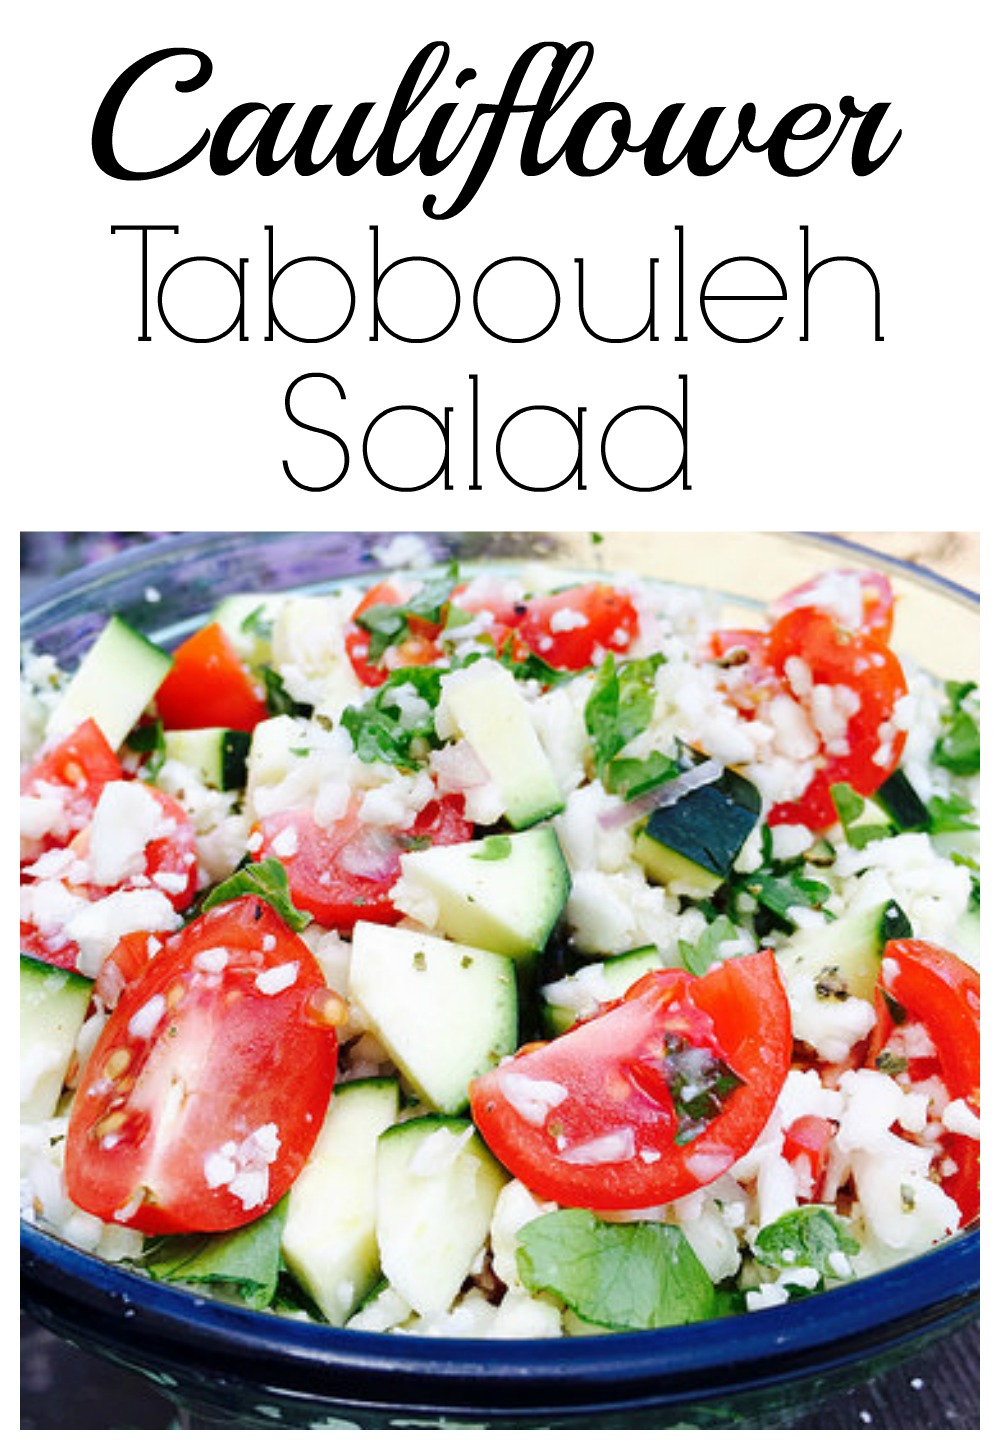 Deliciously EASY grain-free take on Tabbouleh! Paleo, Gluten-Free, Raw, and Vegan.